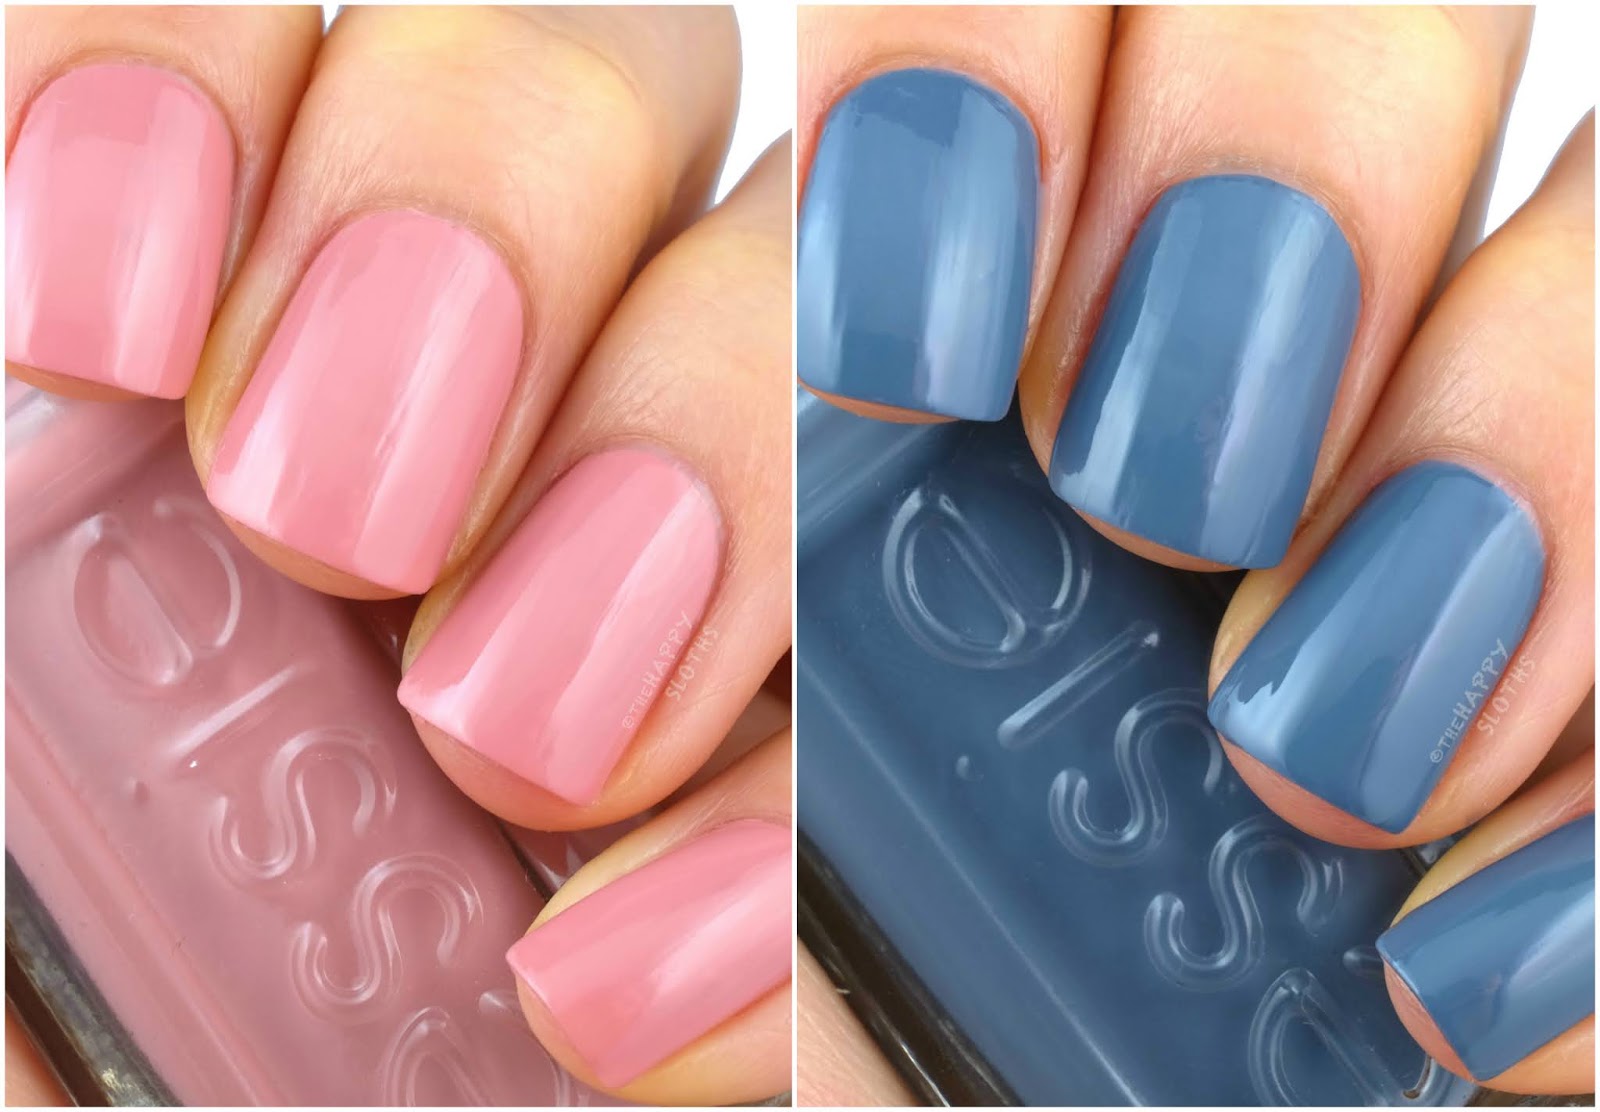 Essie | Expressie Quick Dry Nail Color in "Second Hand, First Love" & "Air Dry": Review and Swatches